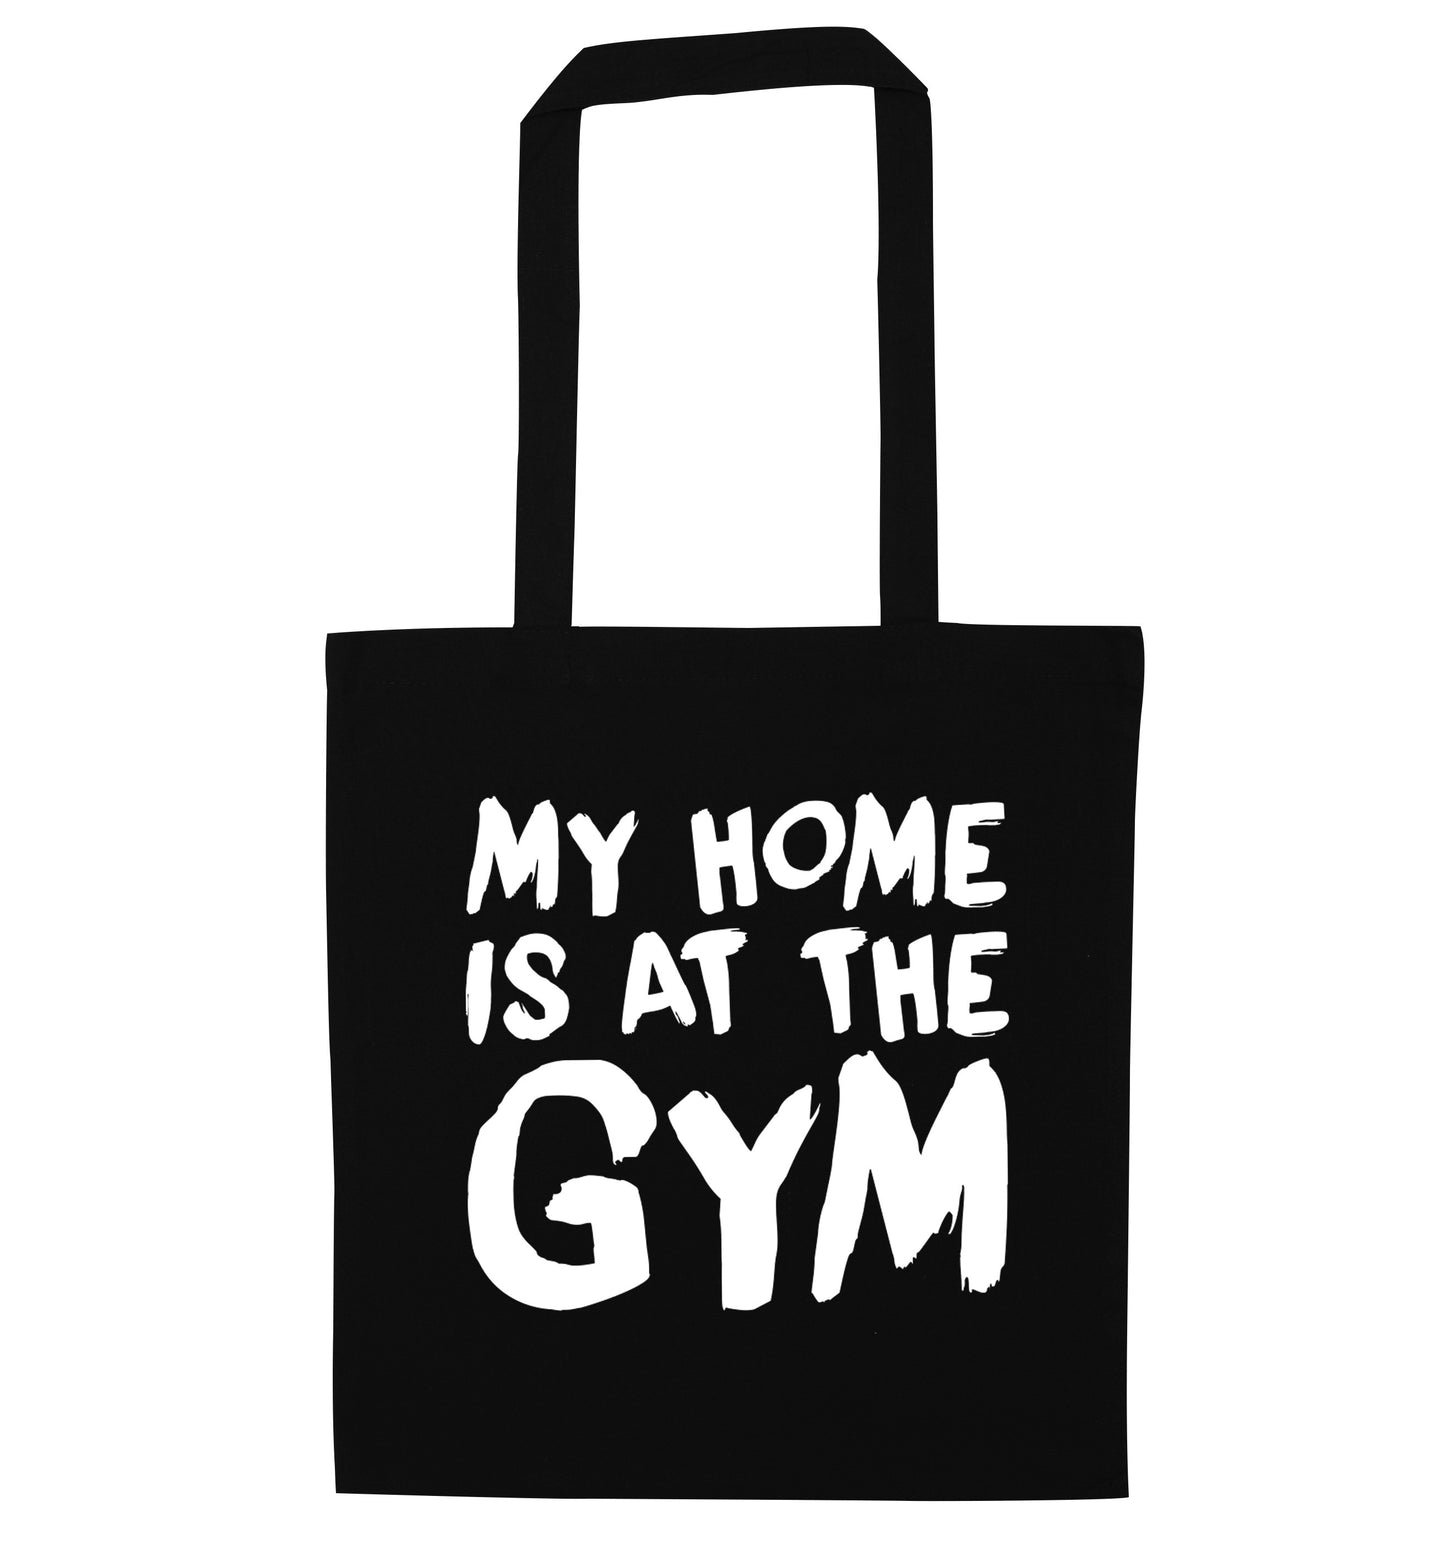 My home is at the gym black tote bag